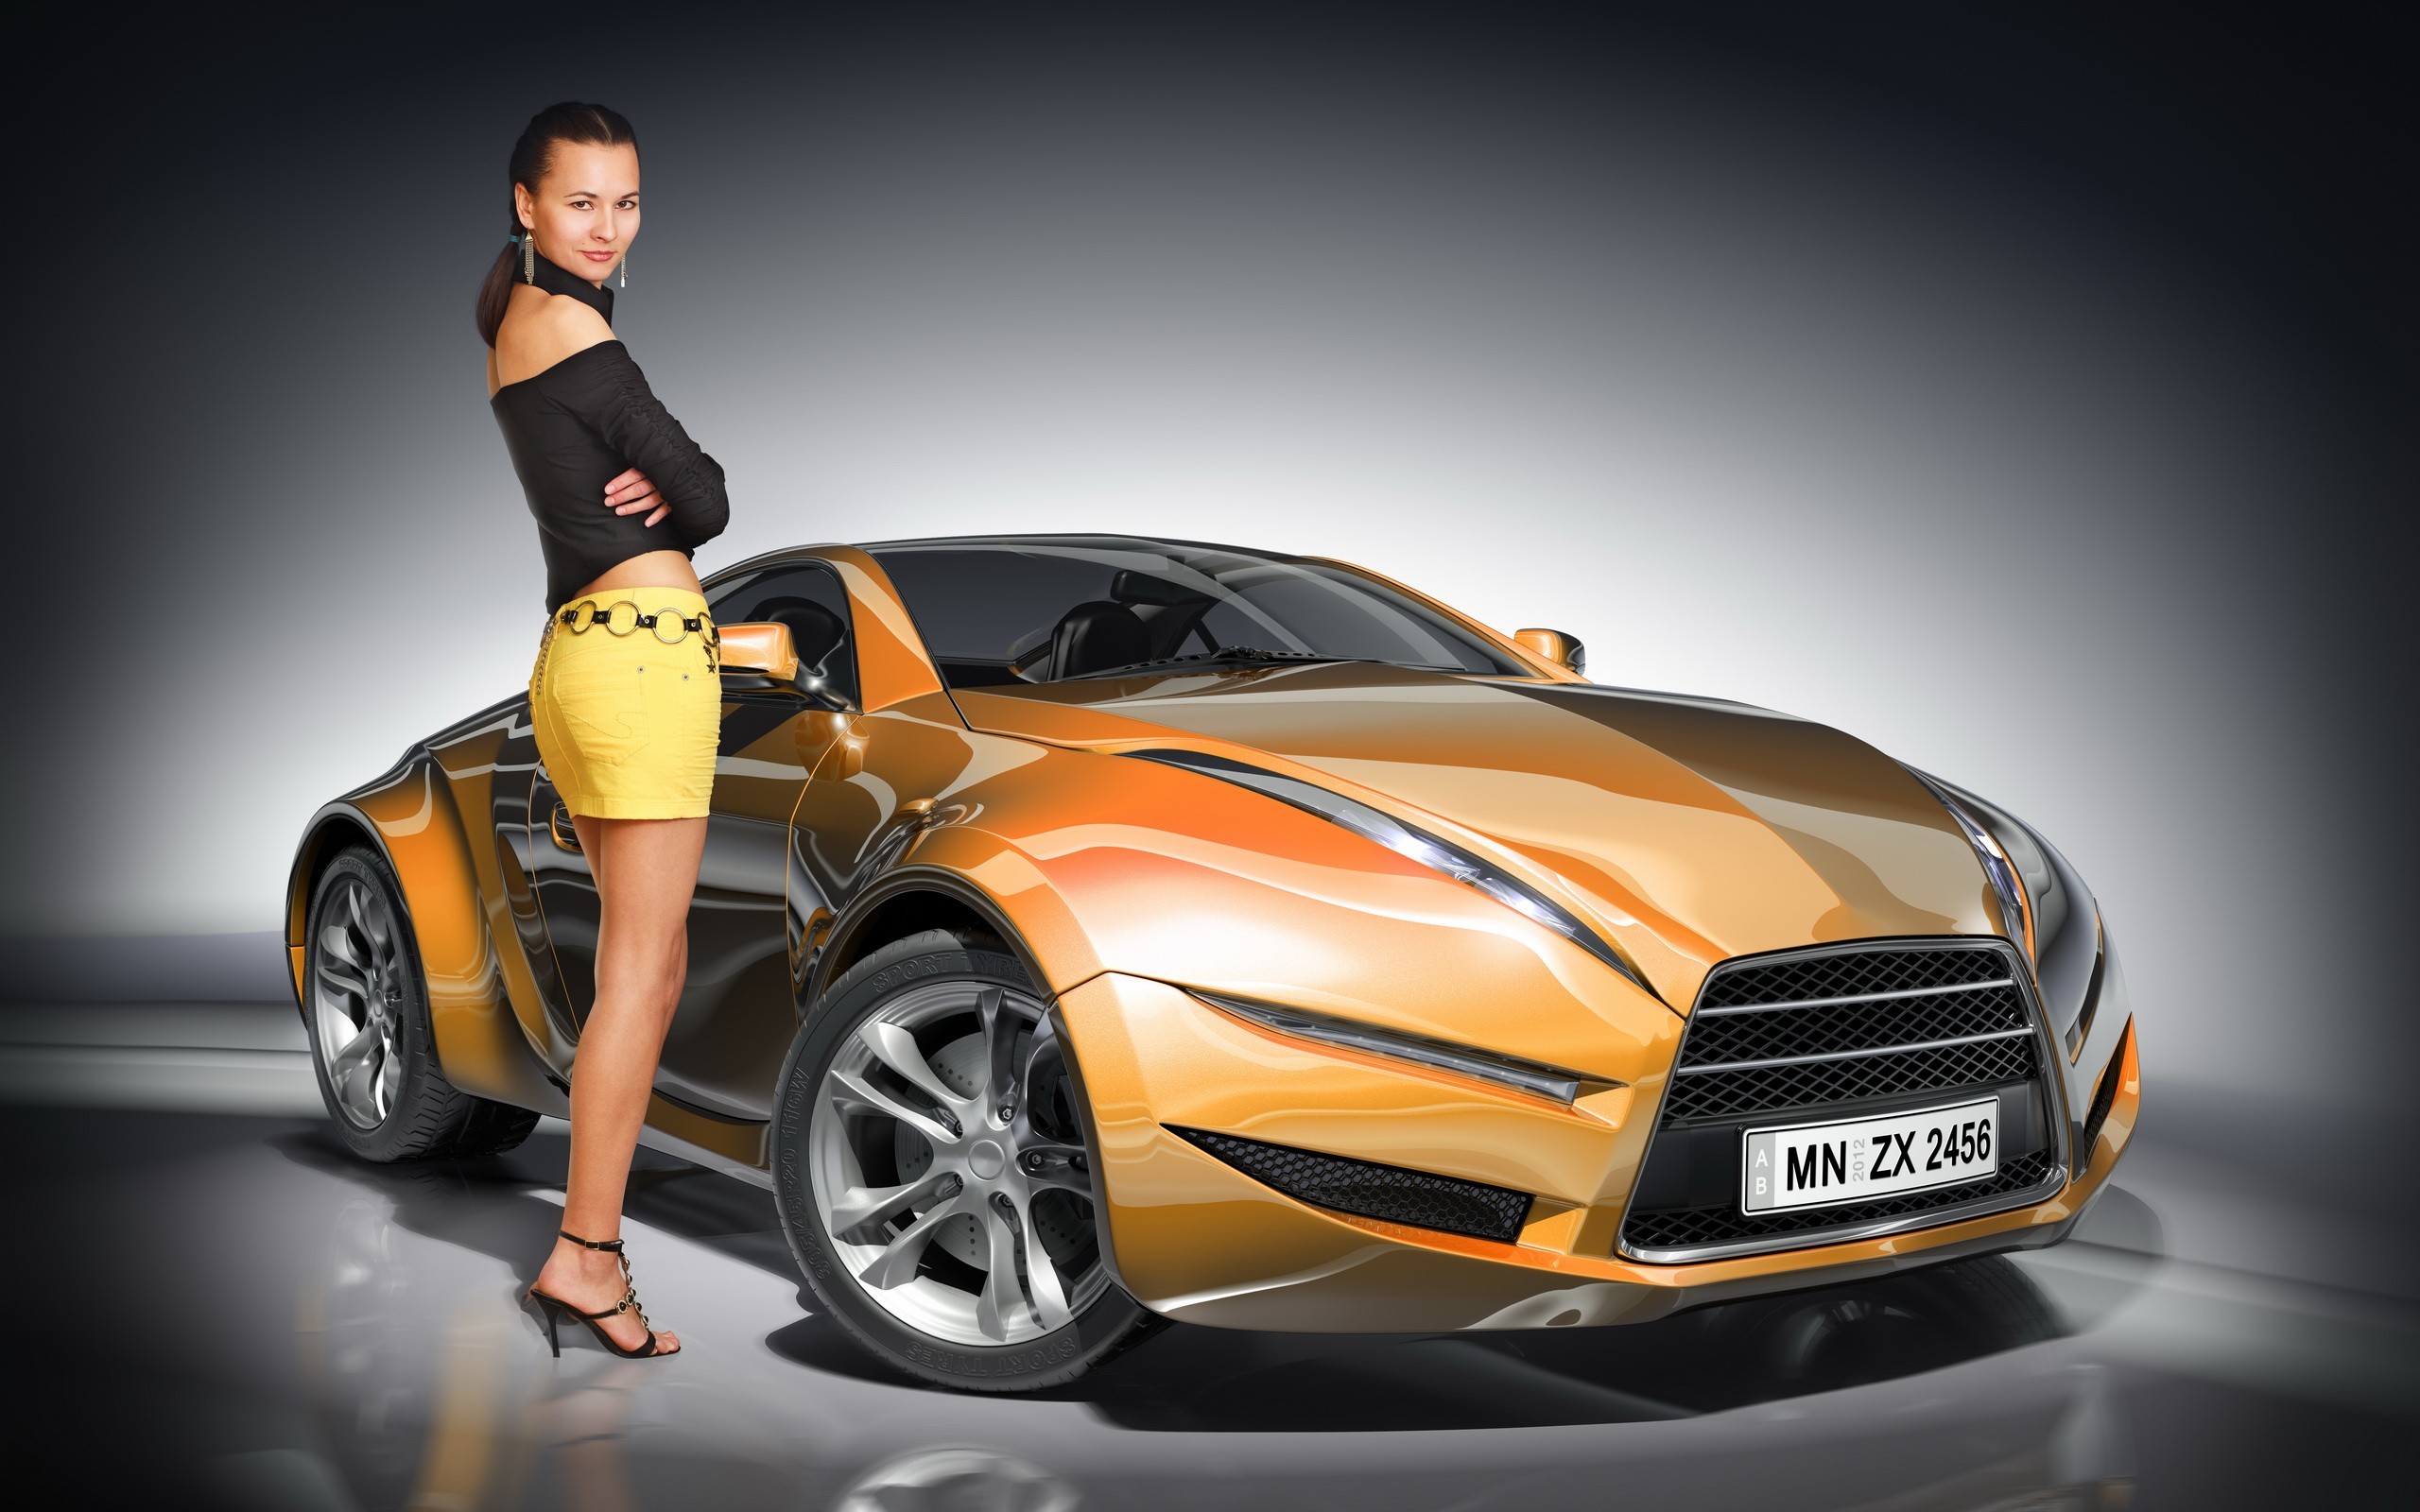 2560x1600, Car And Girl Wallpapers Nice Collection - Nice Girls And Cars - HD Wallpaper 